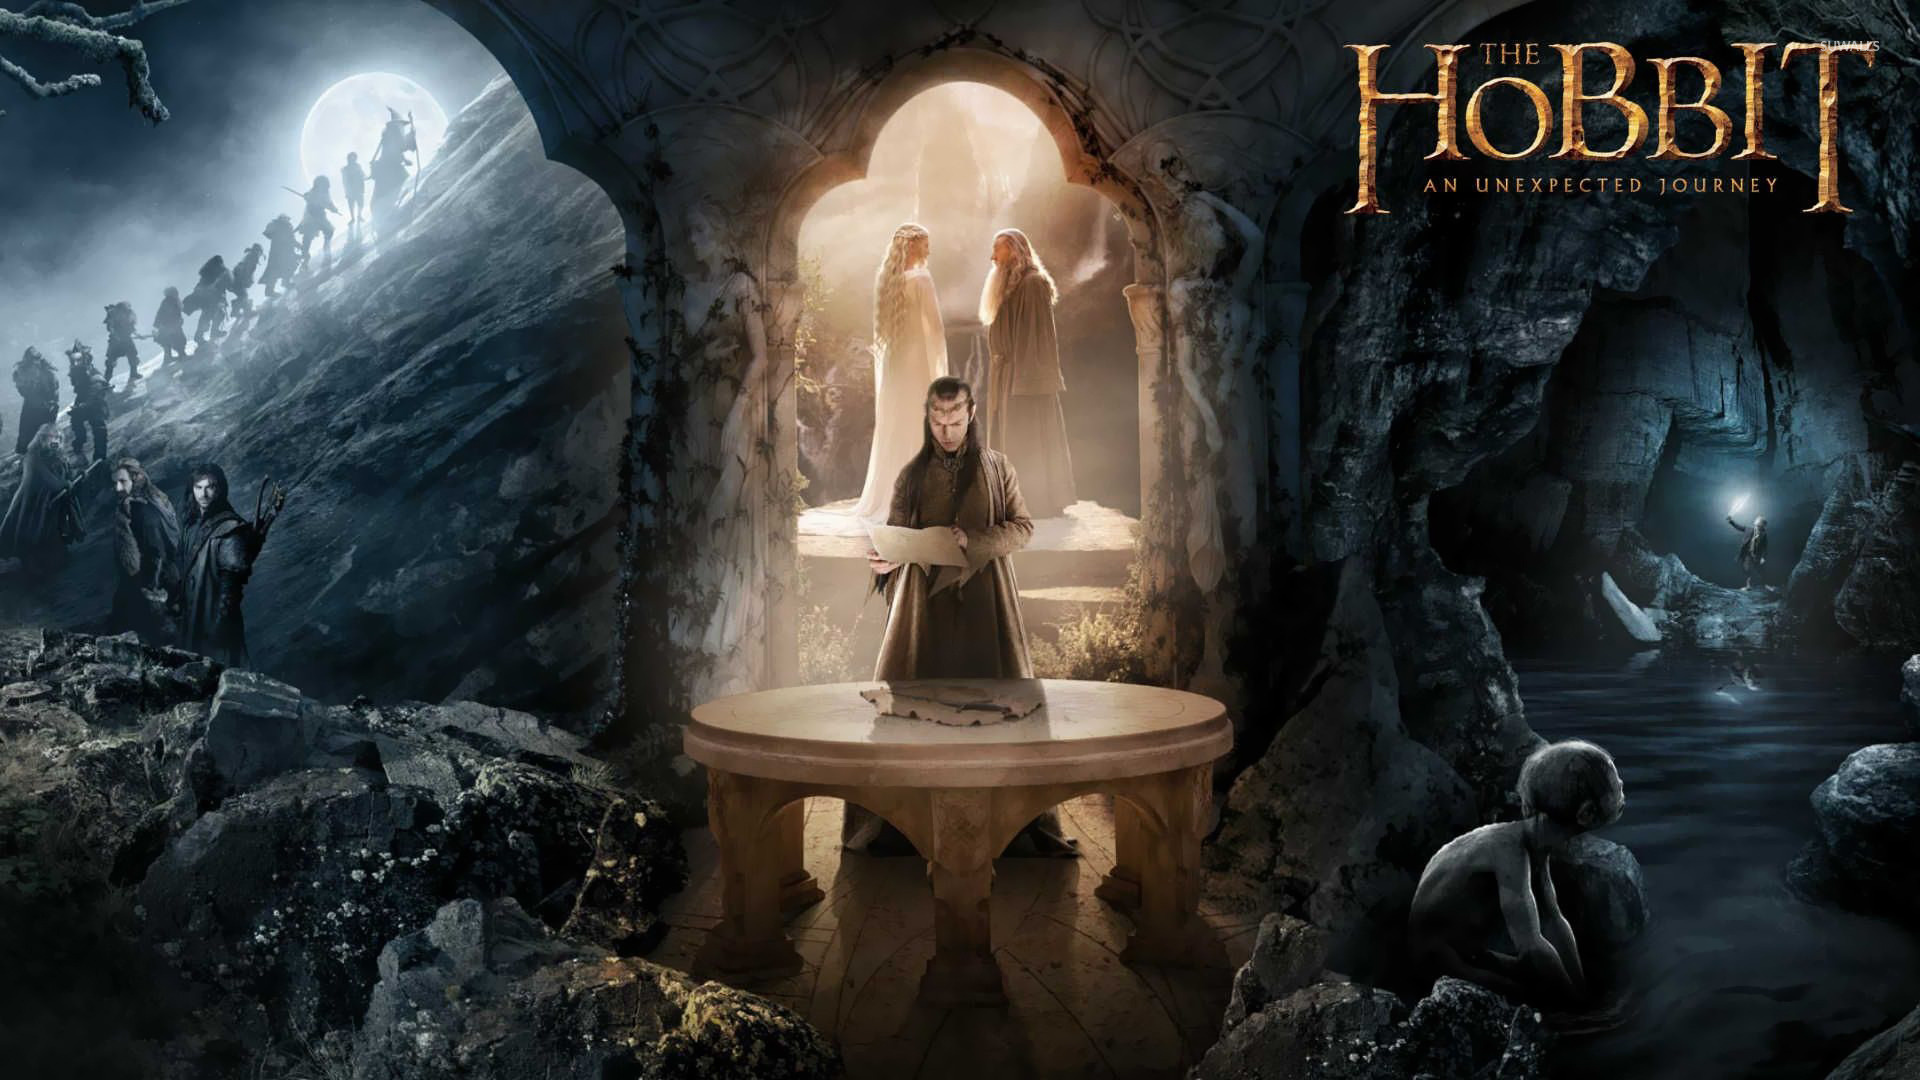 The Hobbit (Movie): Elrond, Half-elf, Lord of Rivendell, a mighty Elf-ruler. 1920x1080 Full HD Wallpaper.